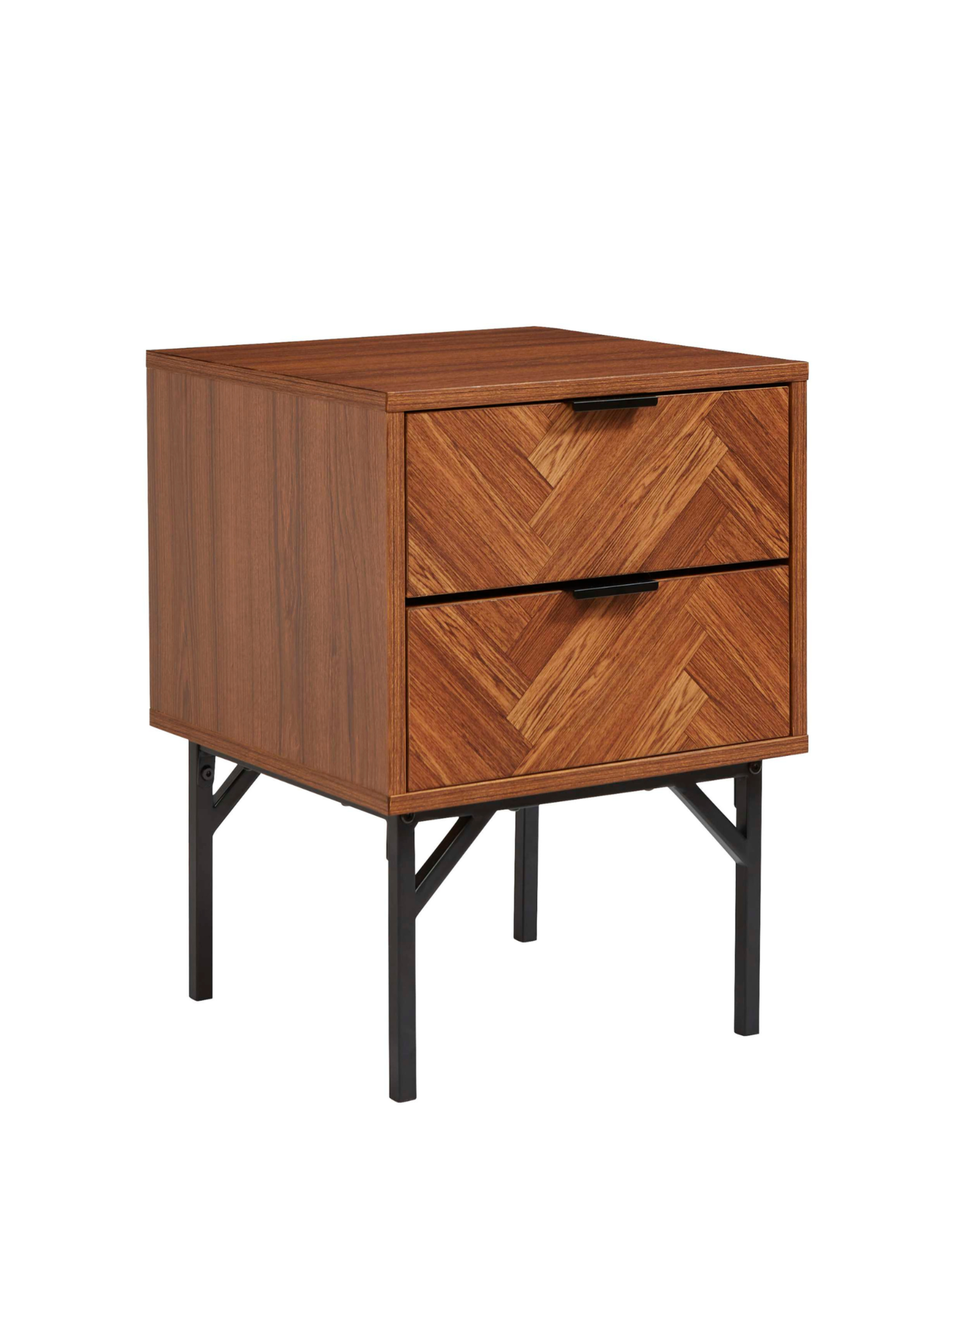 Lloyd Pascal Caprio 2 Drawer Bedside Table with Metal Legs (55cm x 44cm x 40cm)